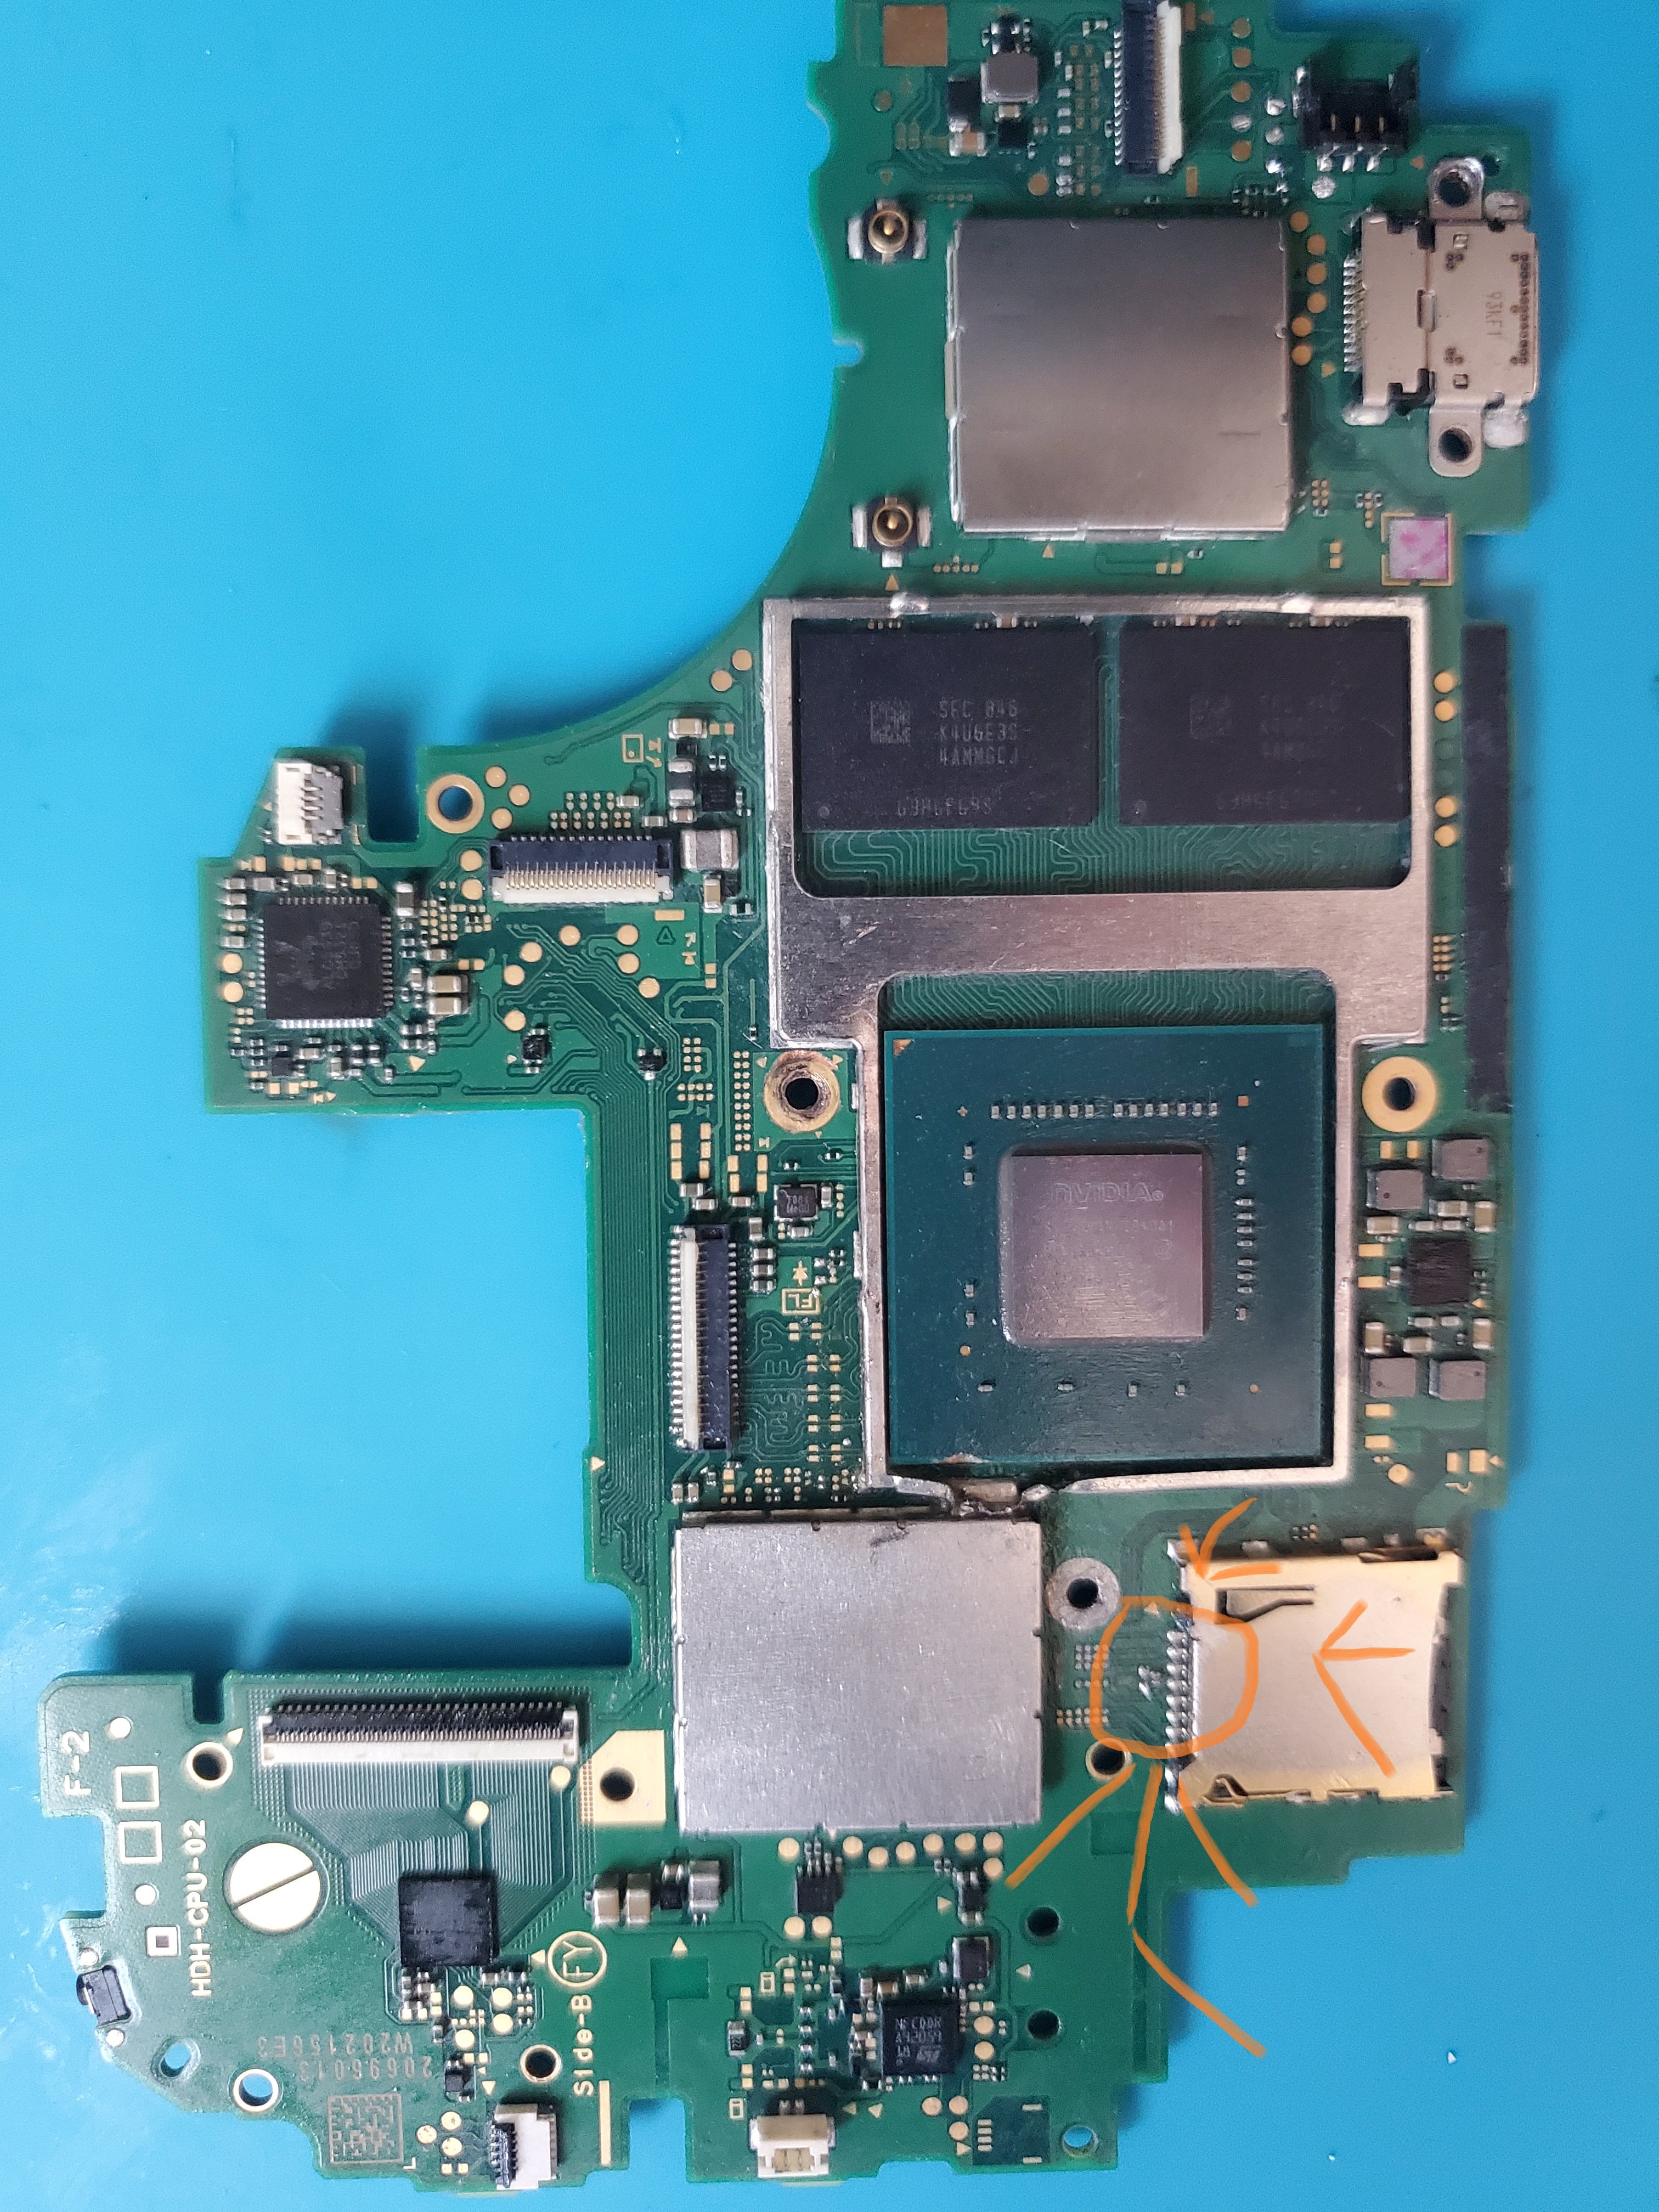 Switch Lite motherboard missing a cap from the microsd reader | GBAtemp.net  - The Independent Video Game Community